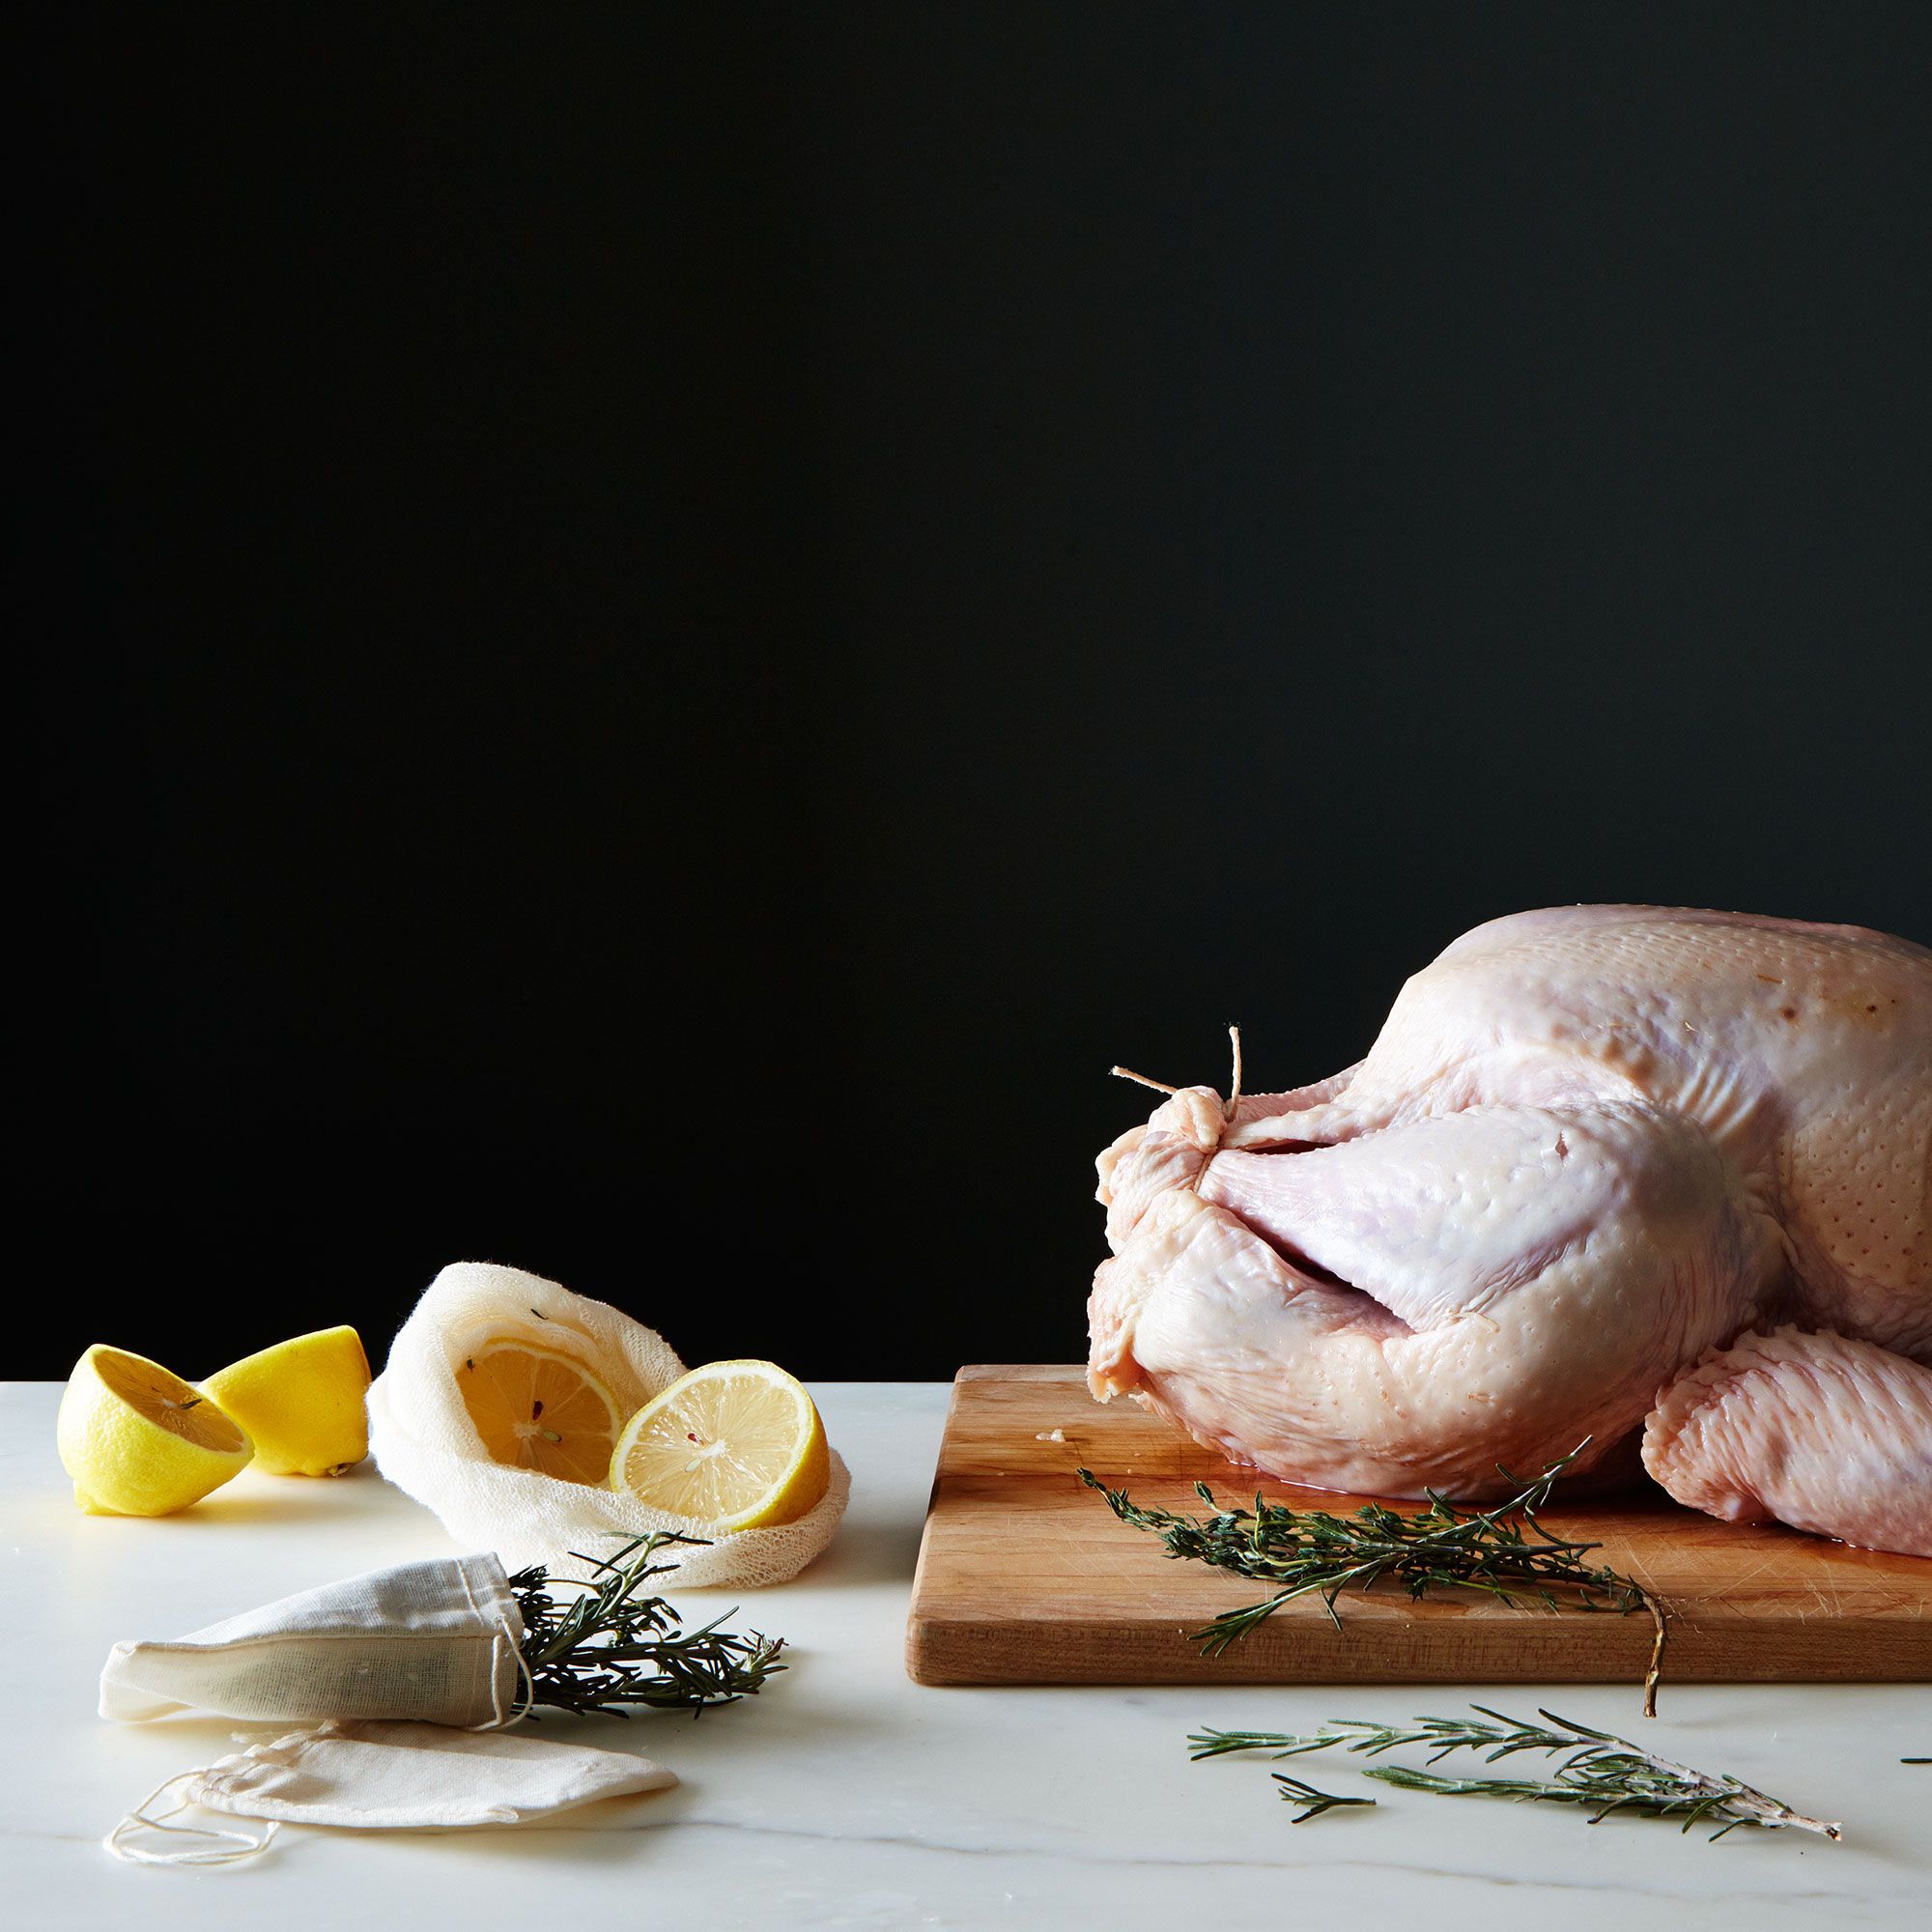 How to Cook a Turkey (& None of That Other Mumbo Jumbo)